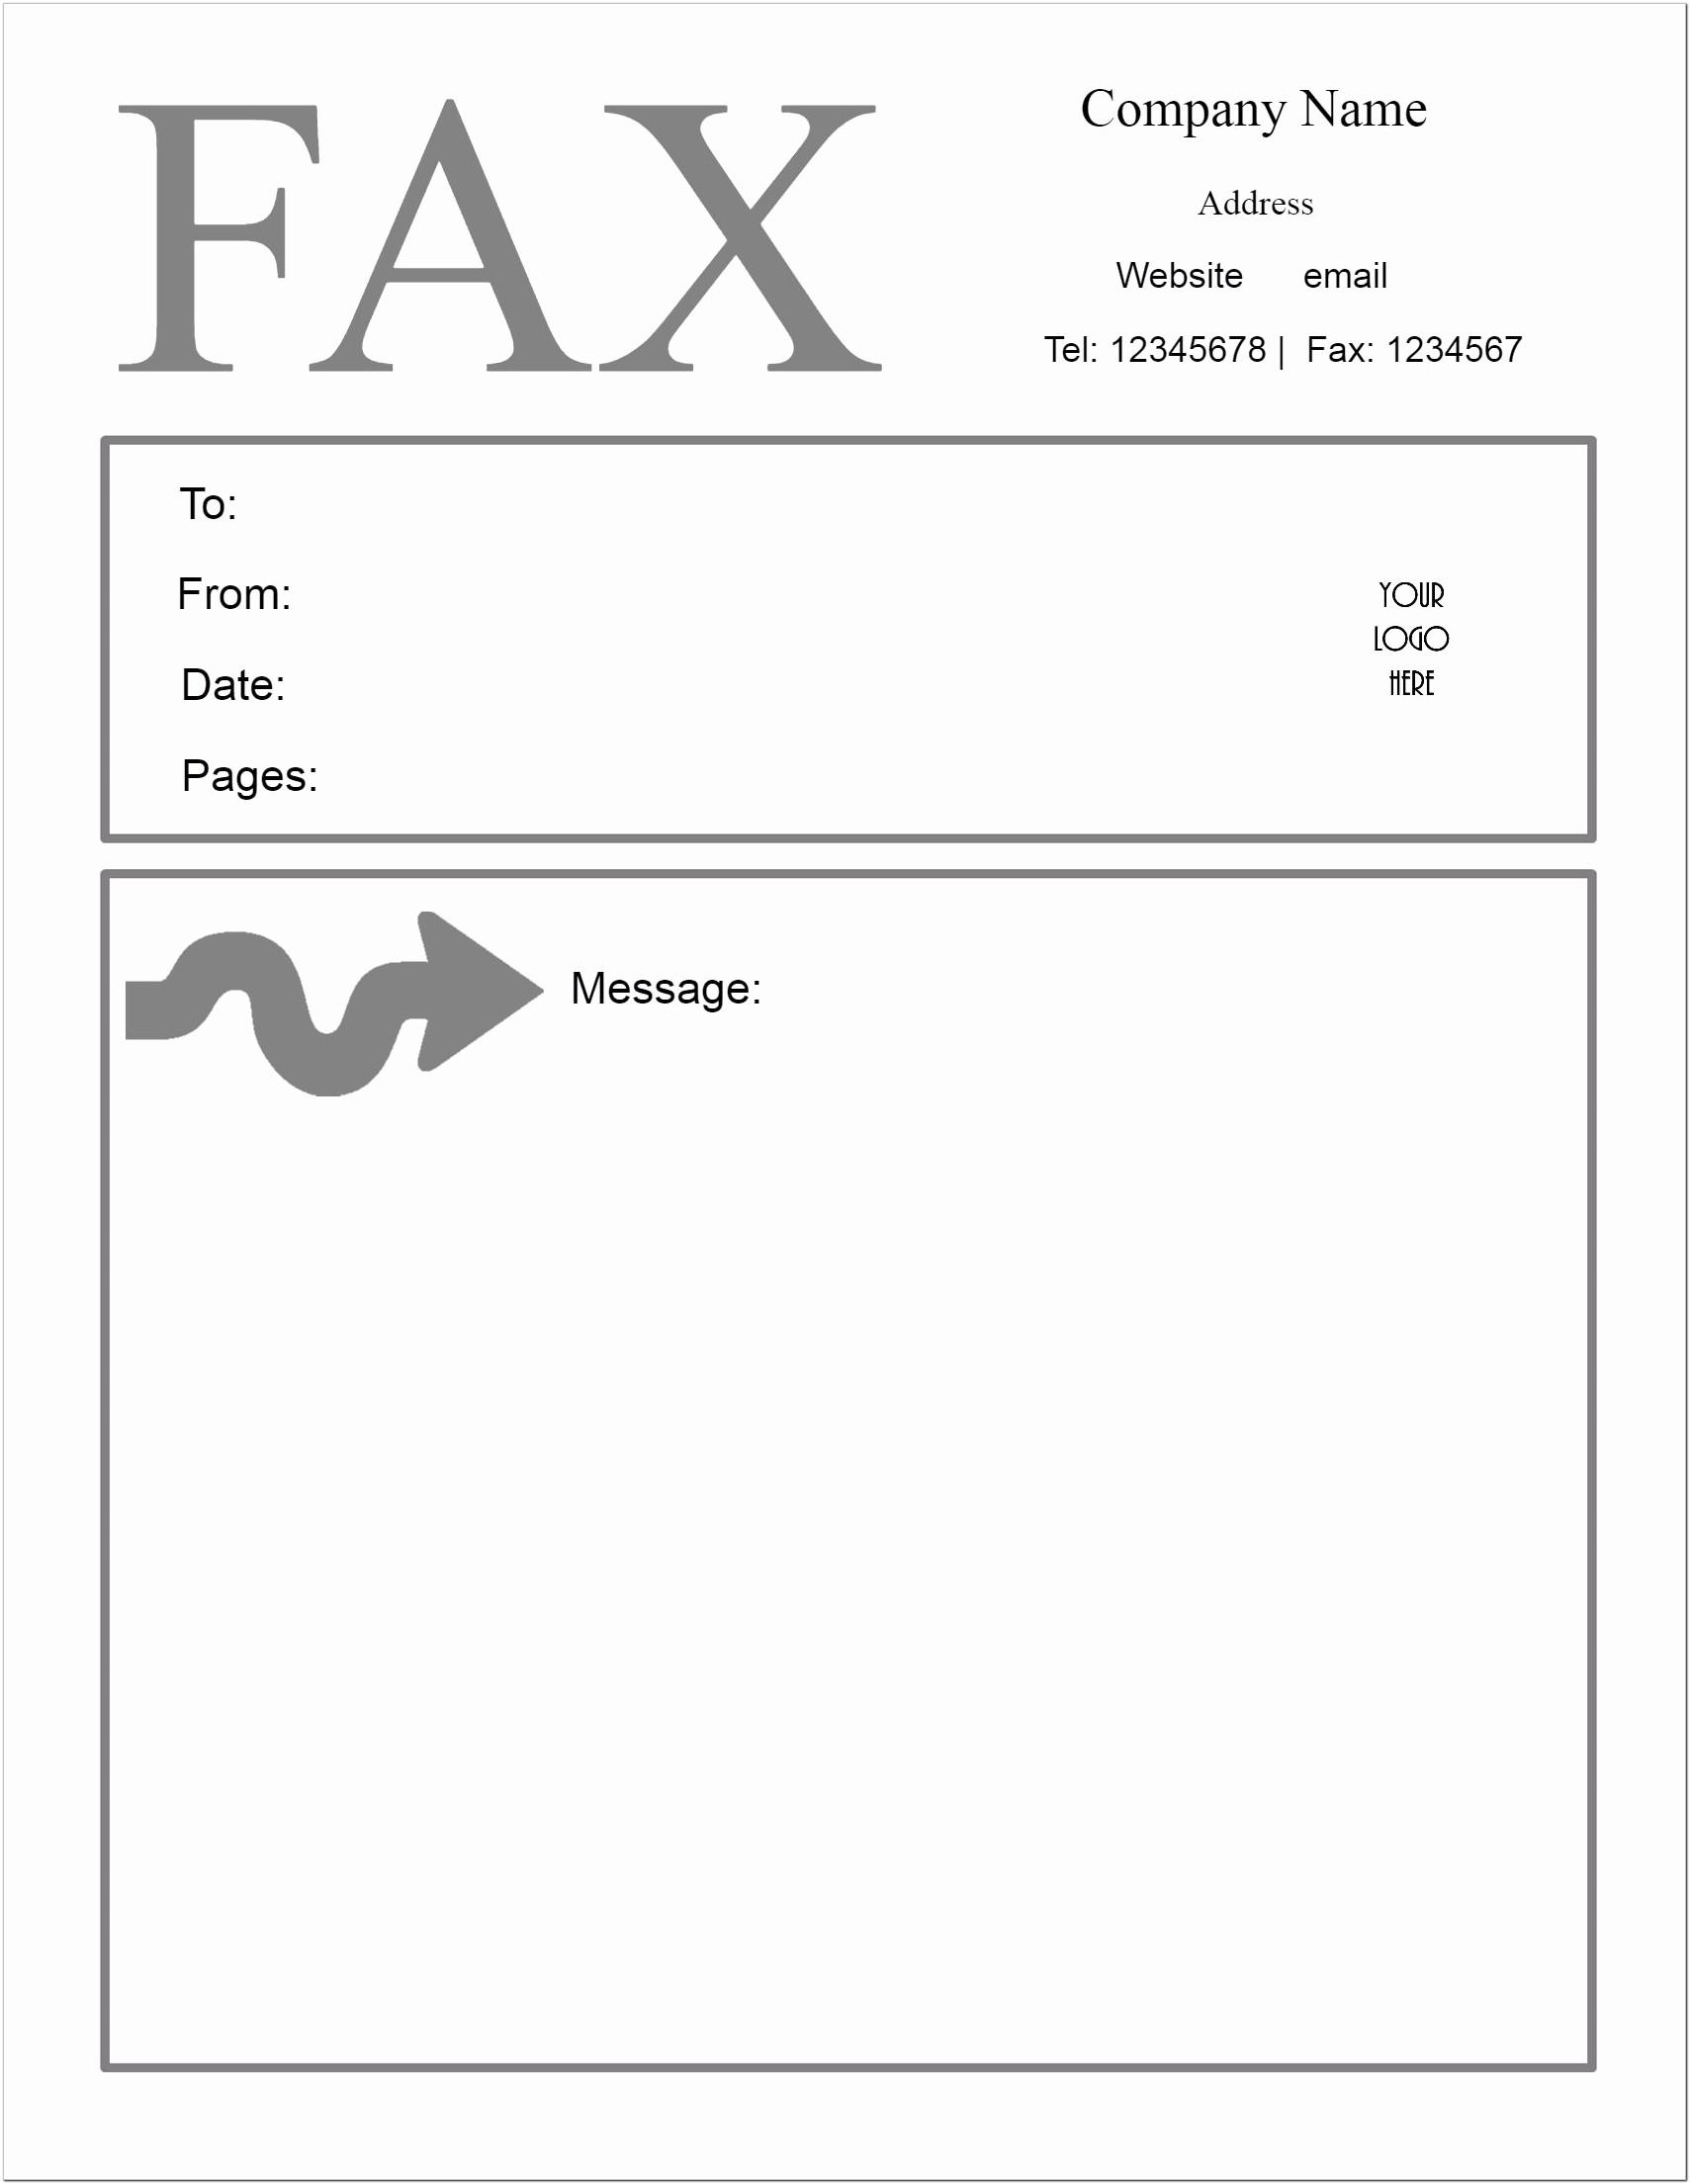 Blank Fax Cover Sheet Template Free